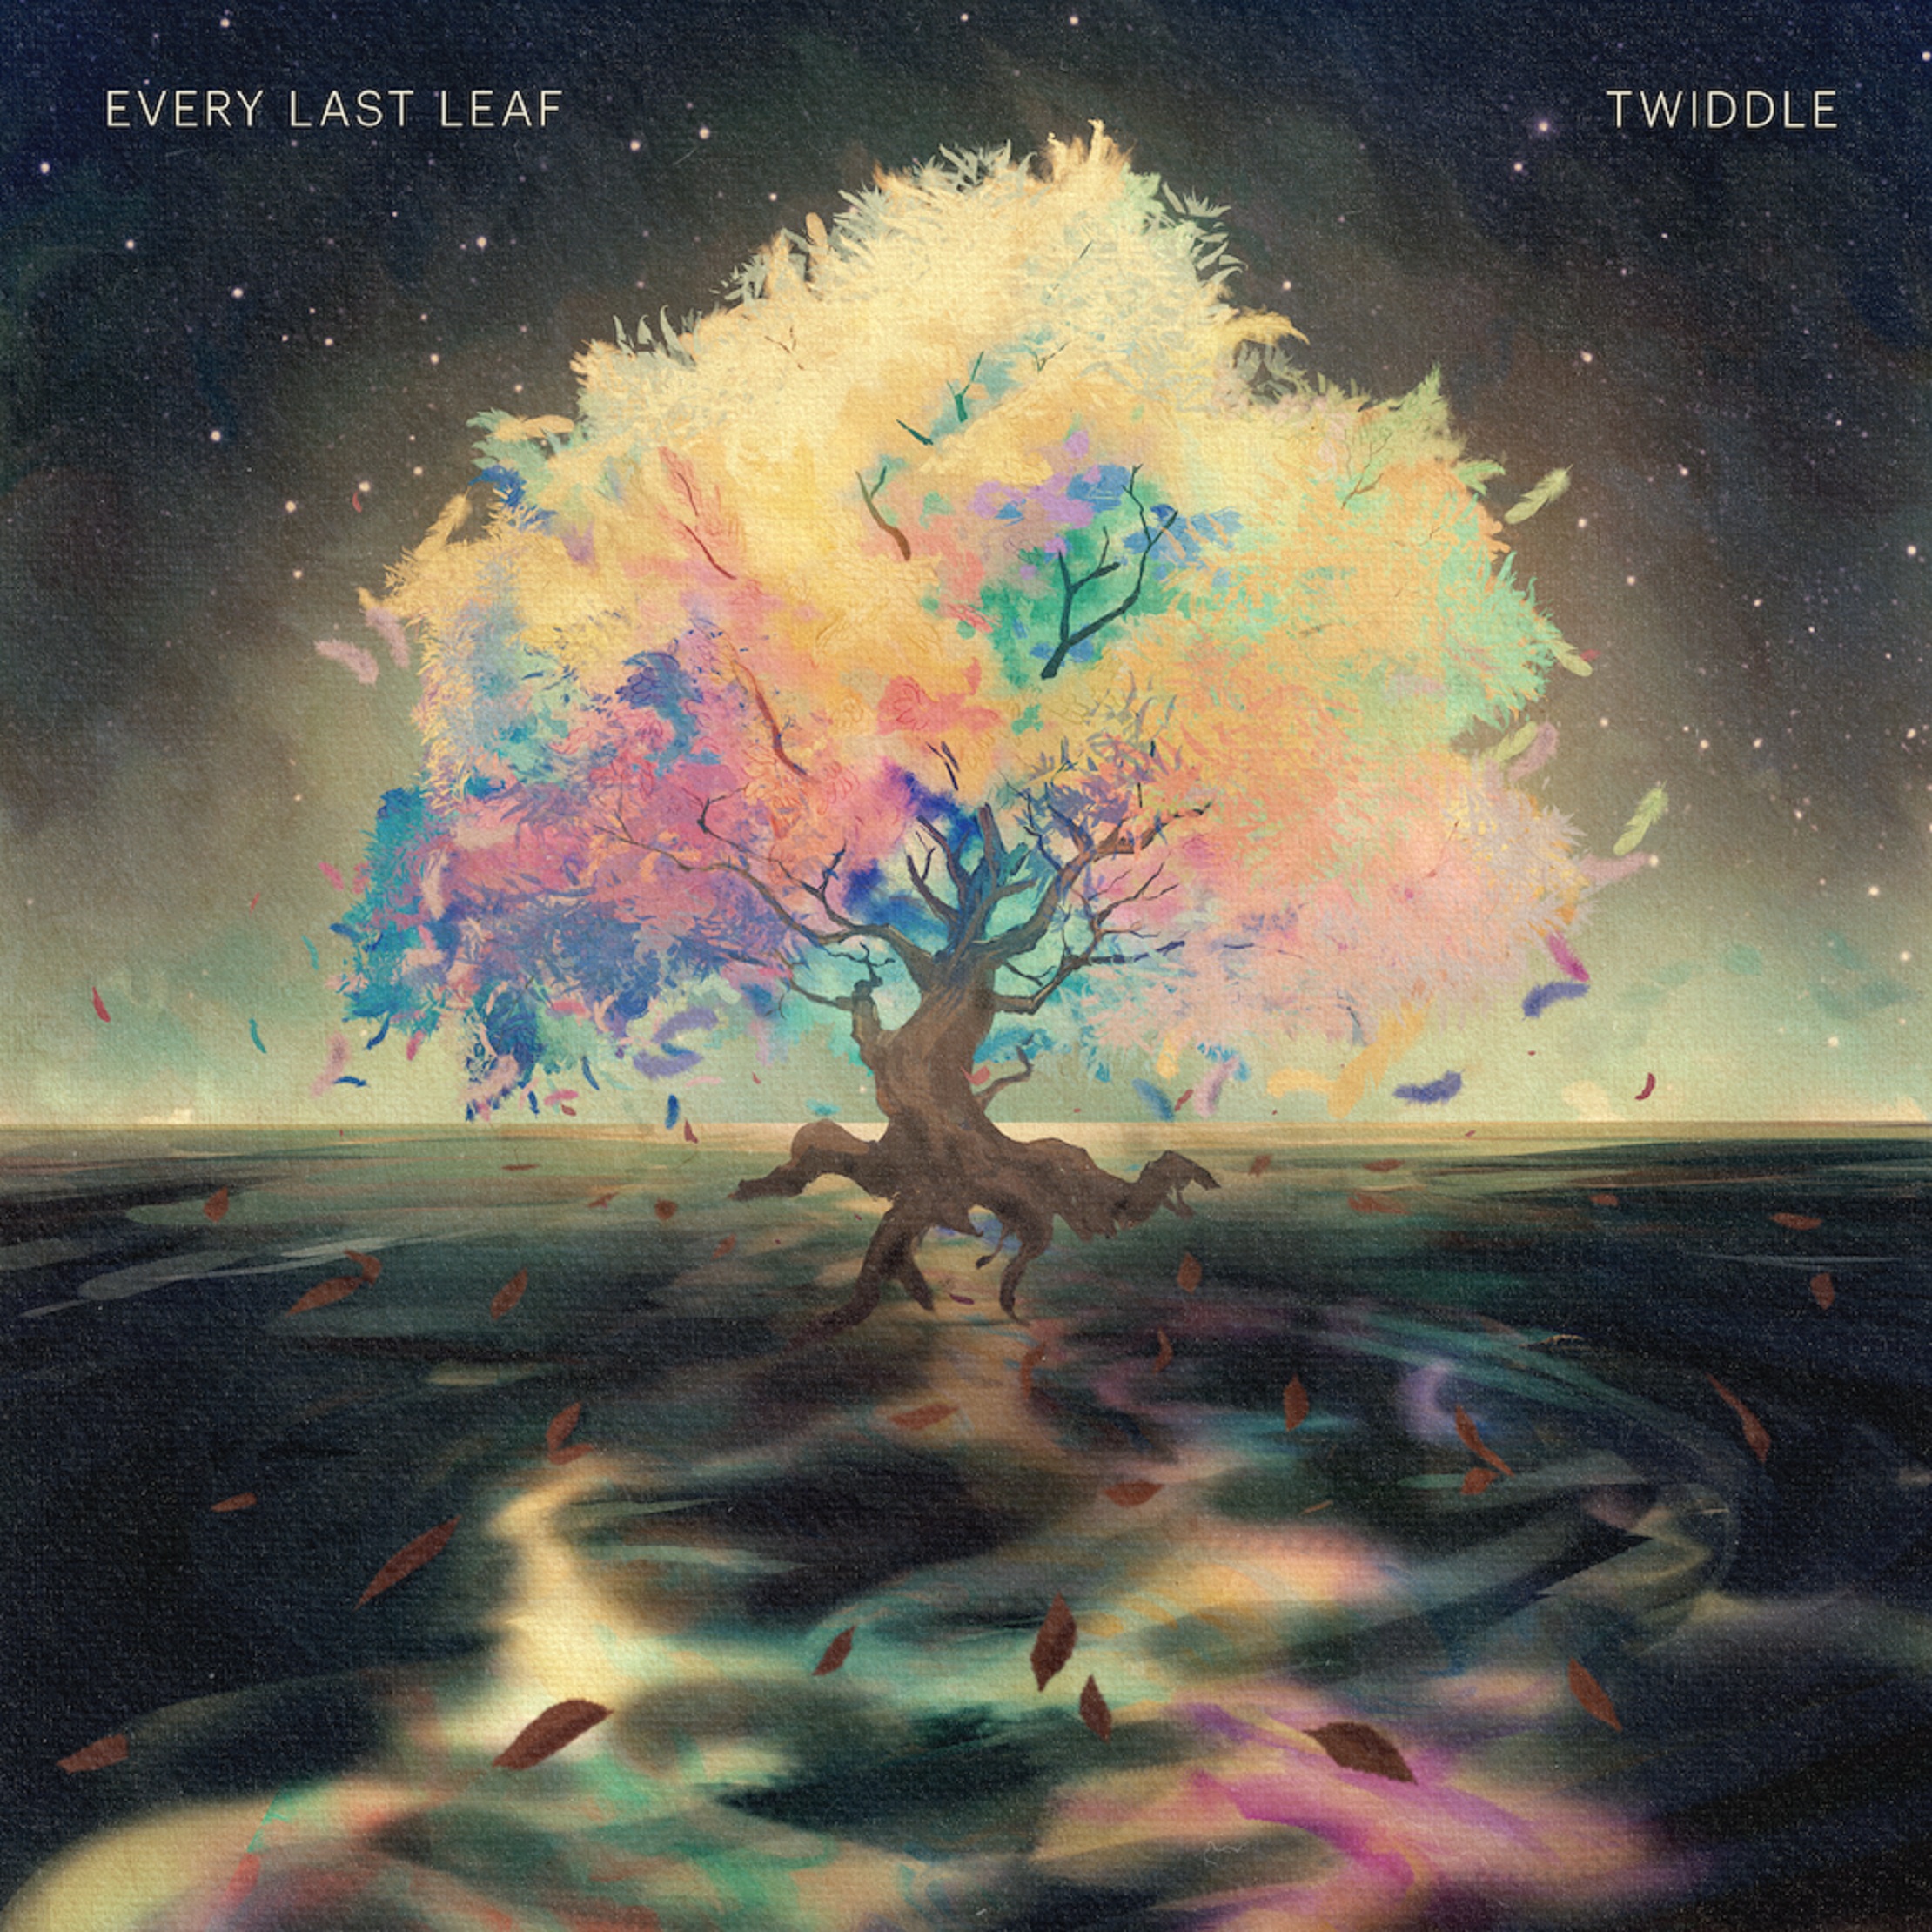 TWIDDLE ANNOUNCE UPCOMING STUDIO ALBUM, EVERY LAST LEAF - NEW SINGLE + MUSIC VIDEO